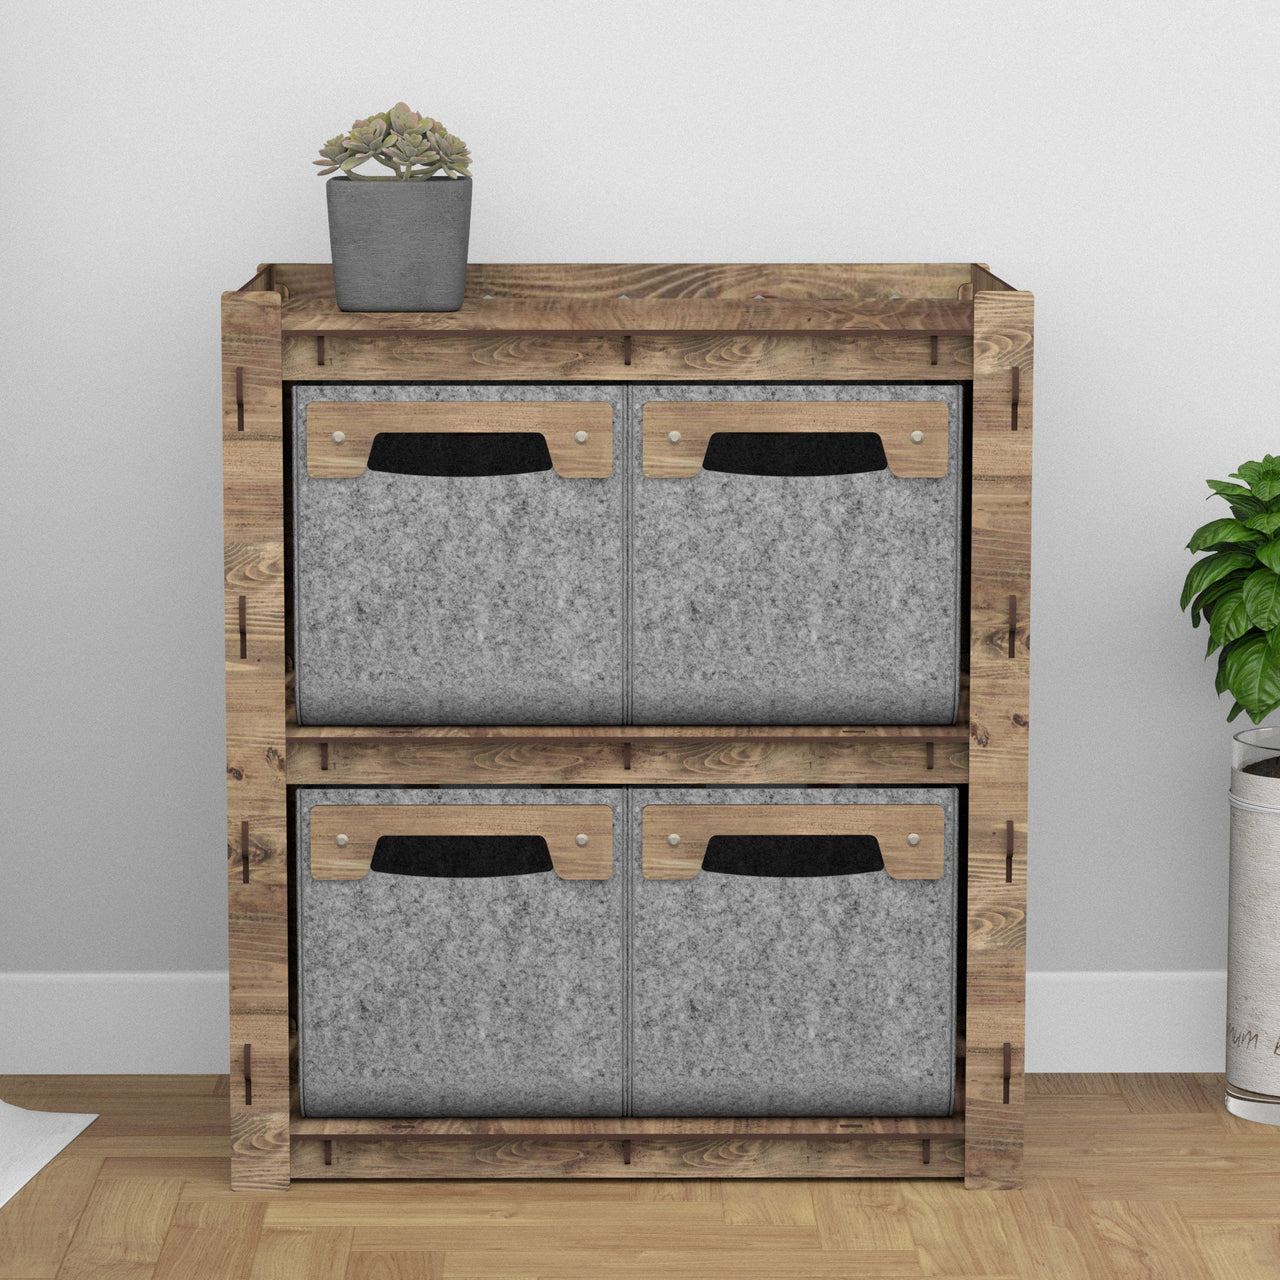 Honeycomb Bedside Table Nightstand 4 Drawers [4 SMALL GRAY BINS]